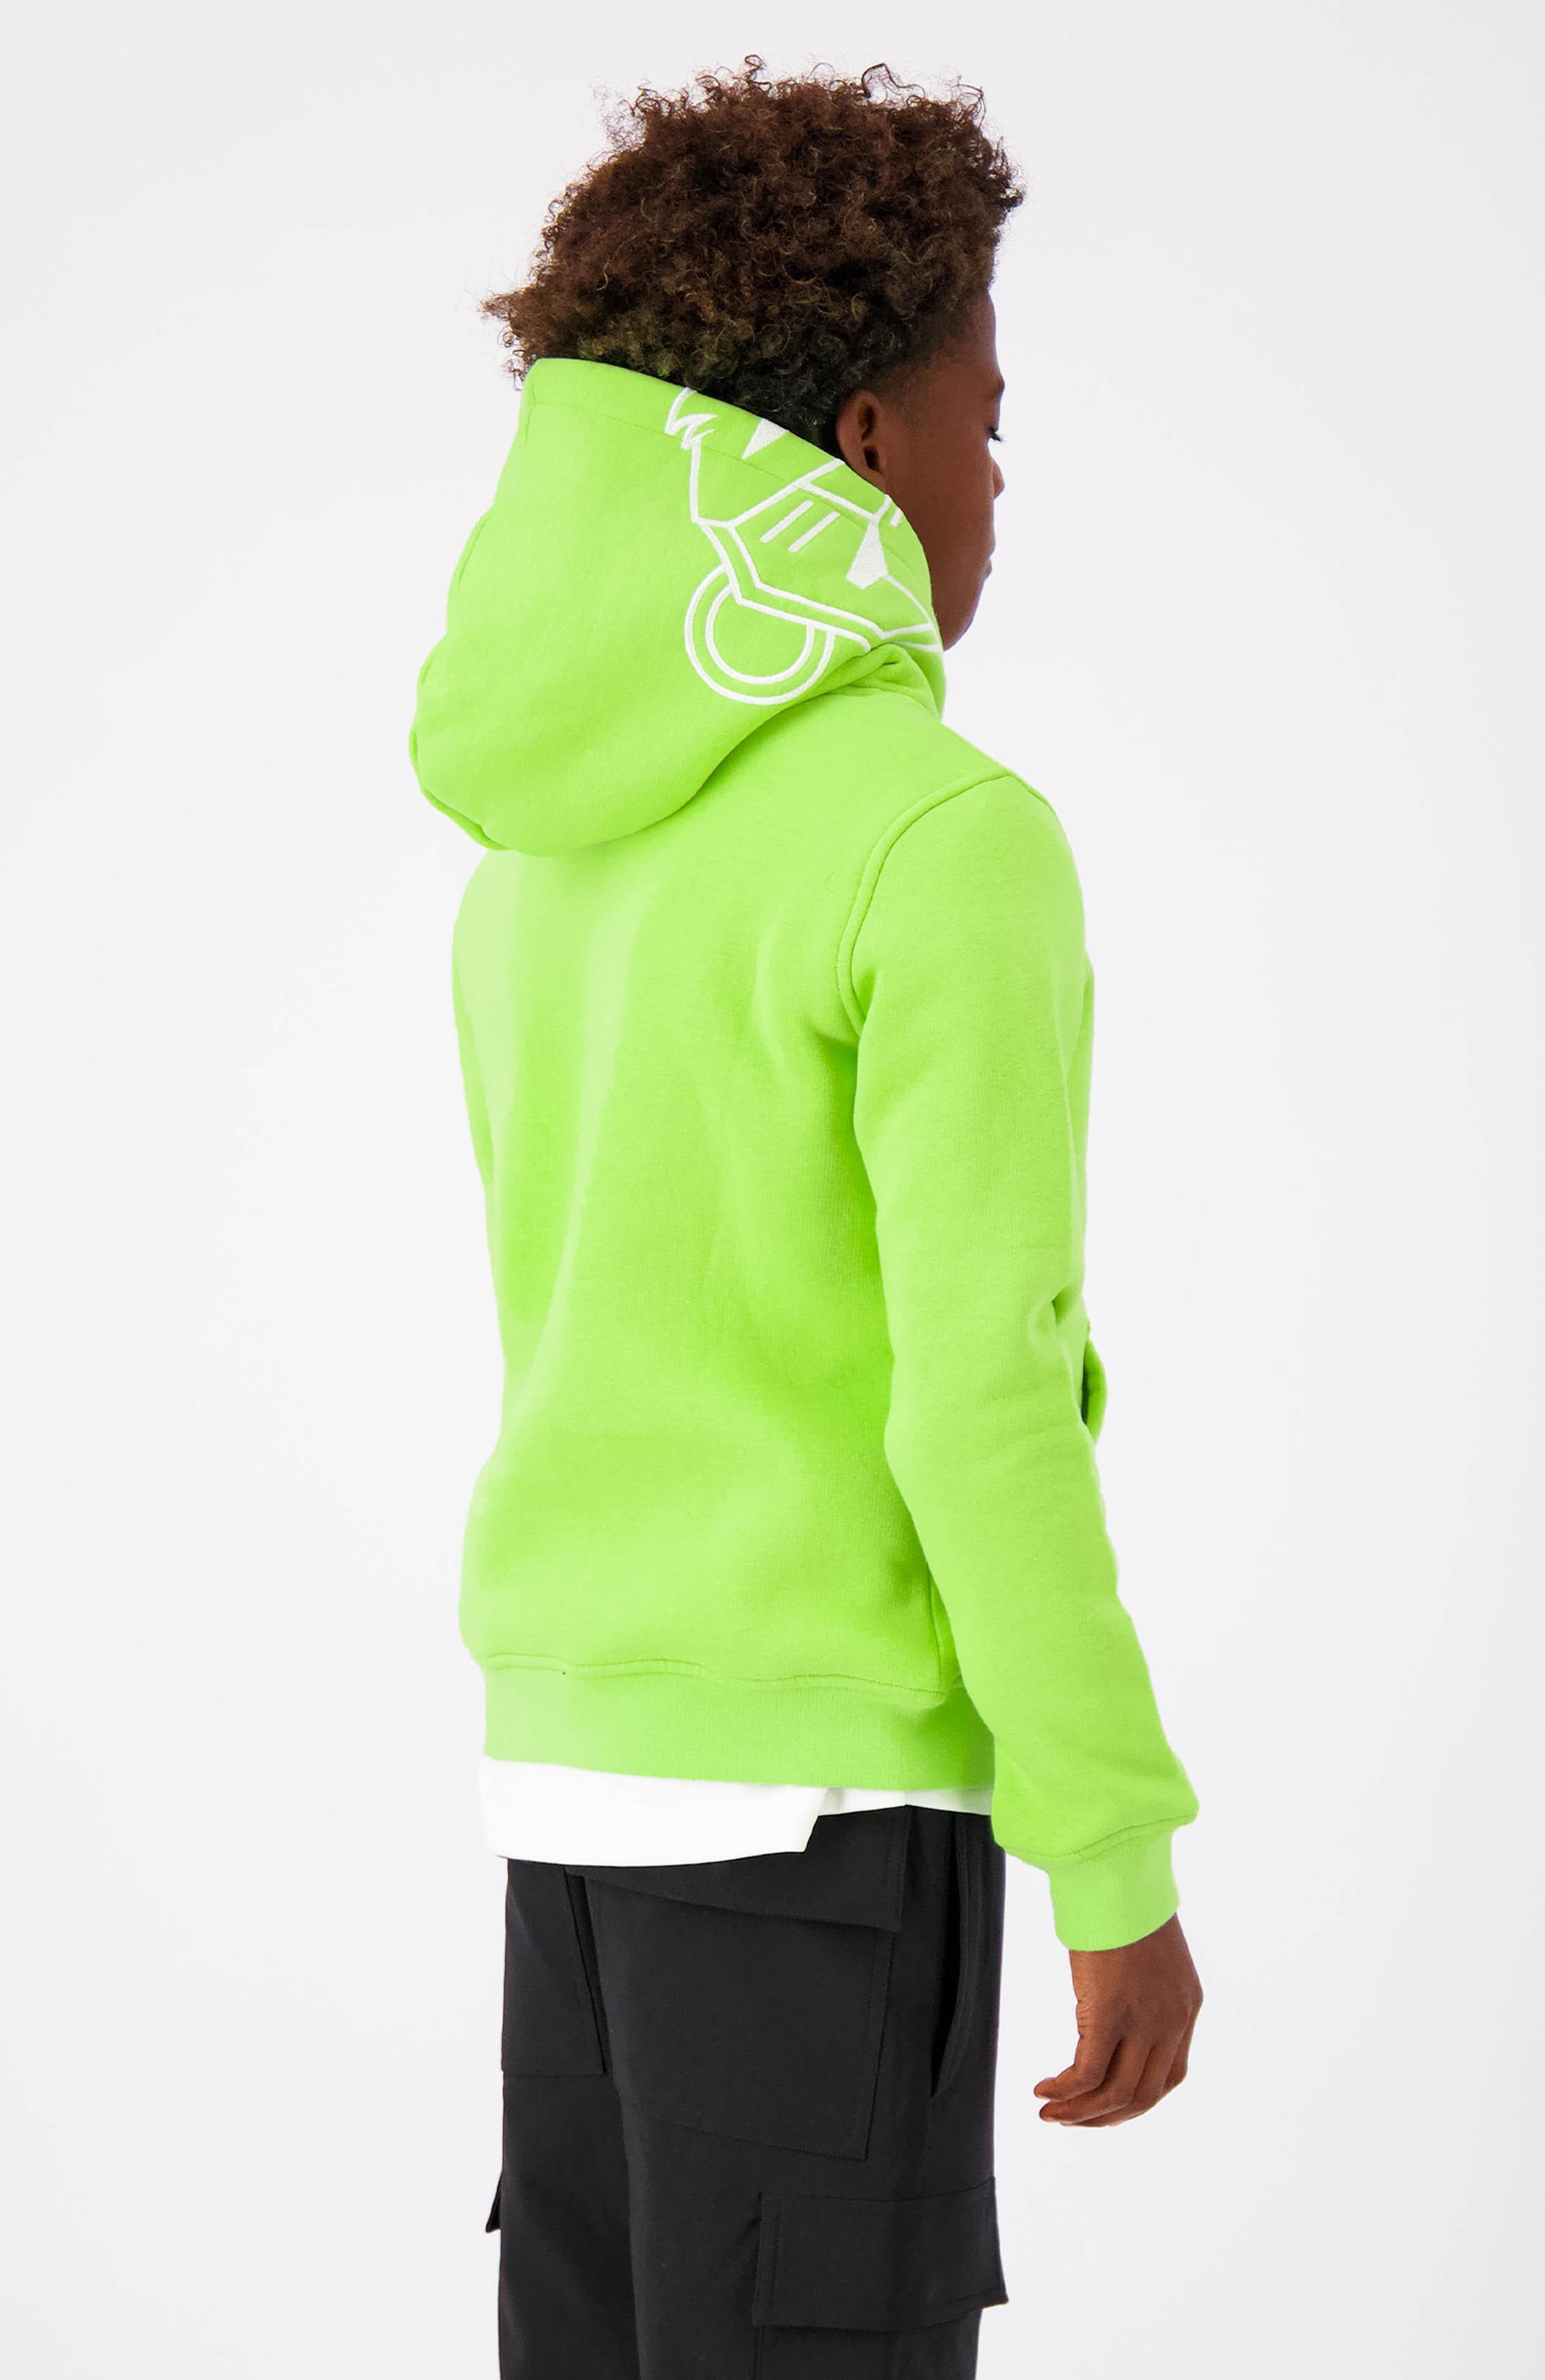 INCOGNITO HOODY | Green